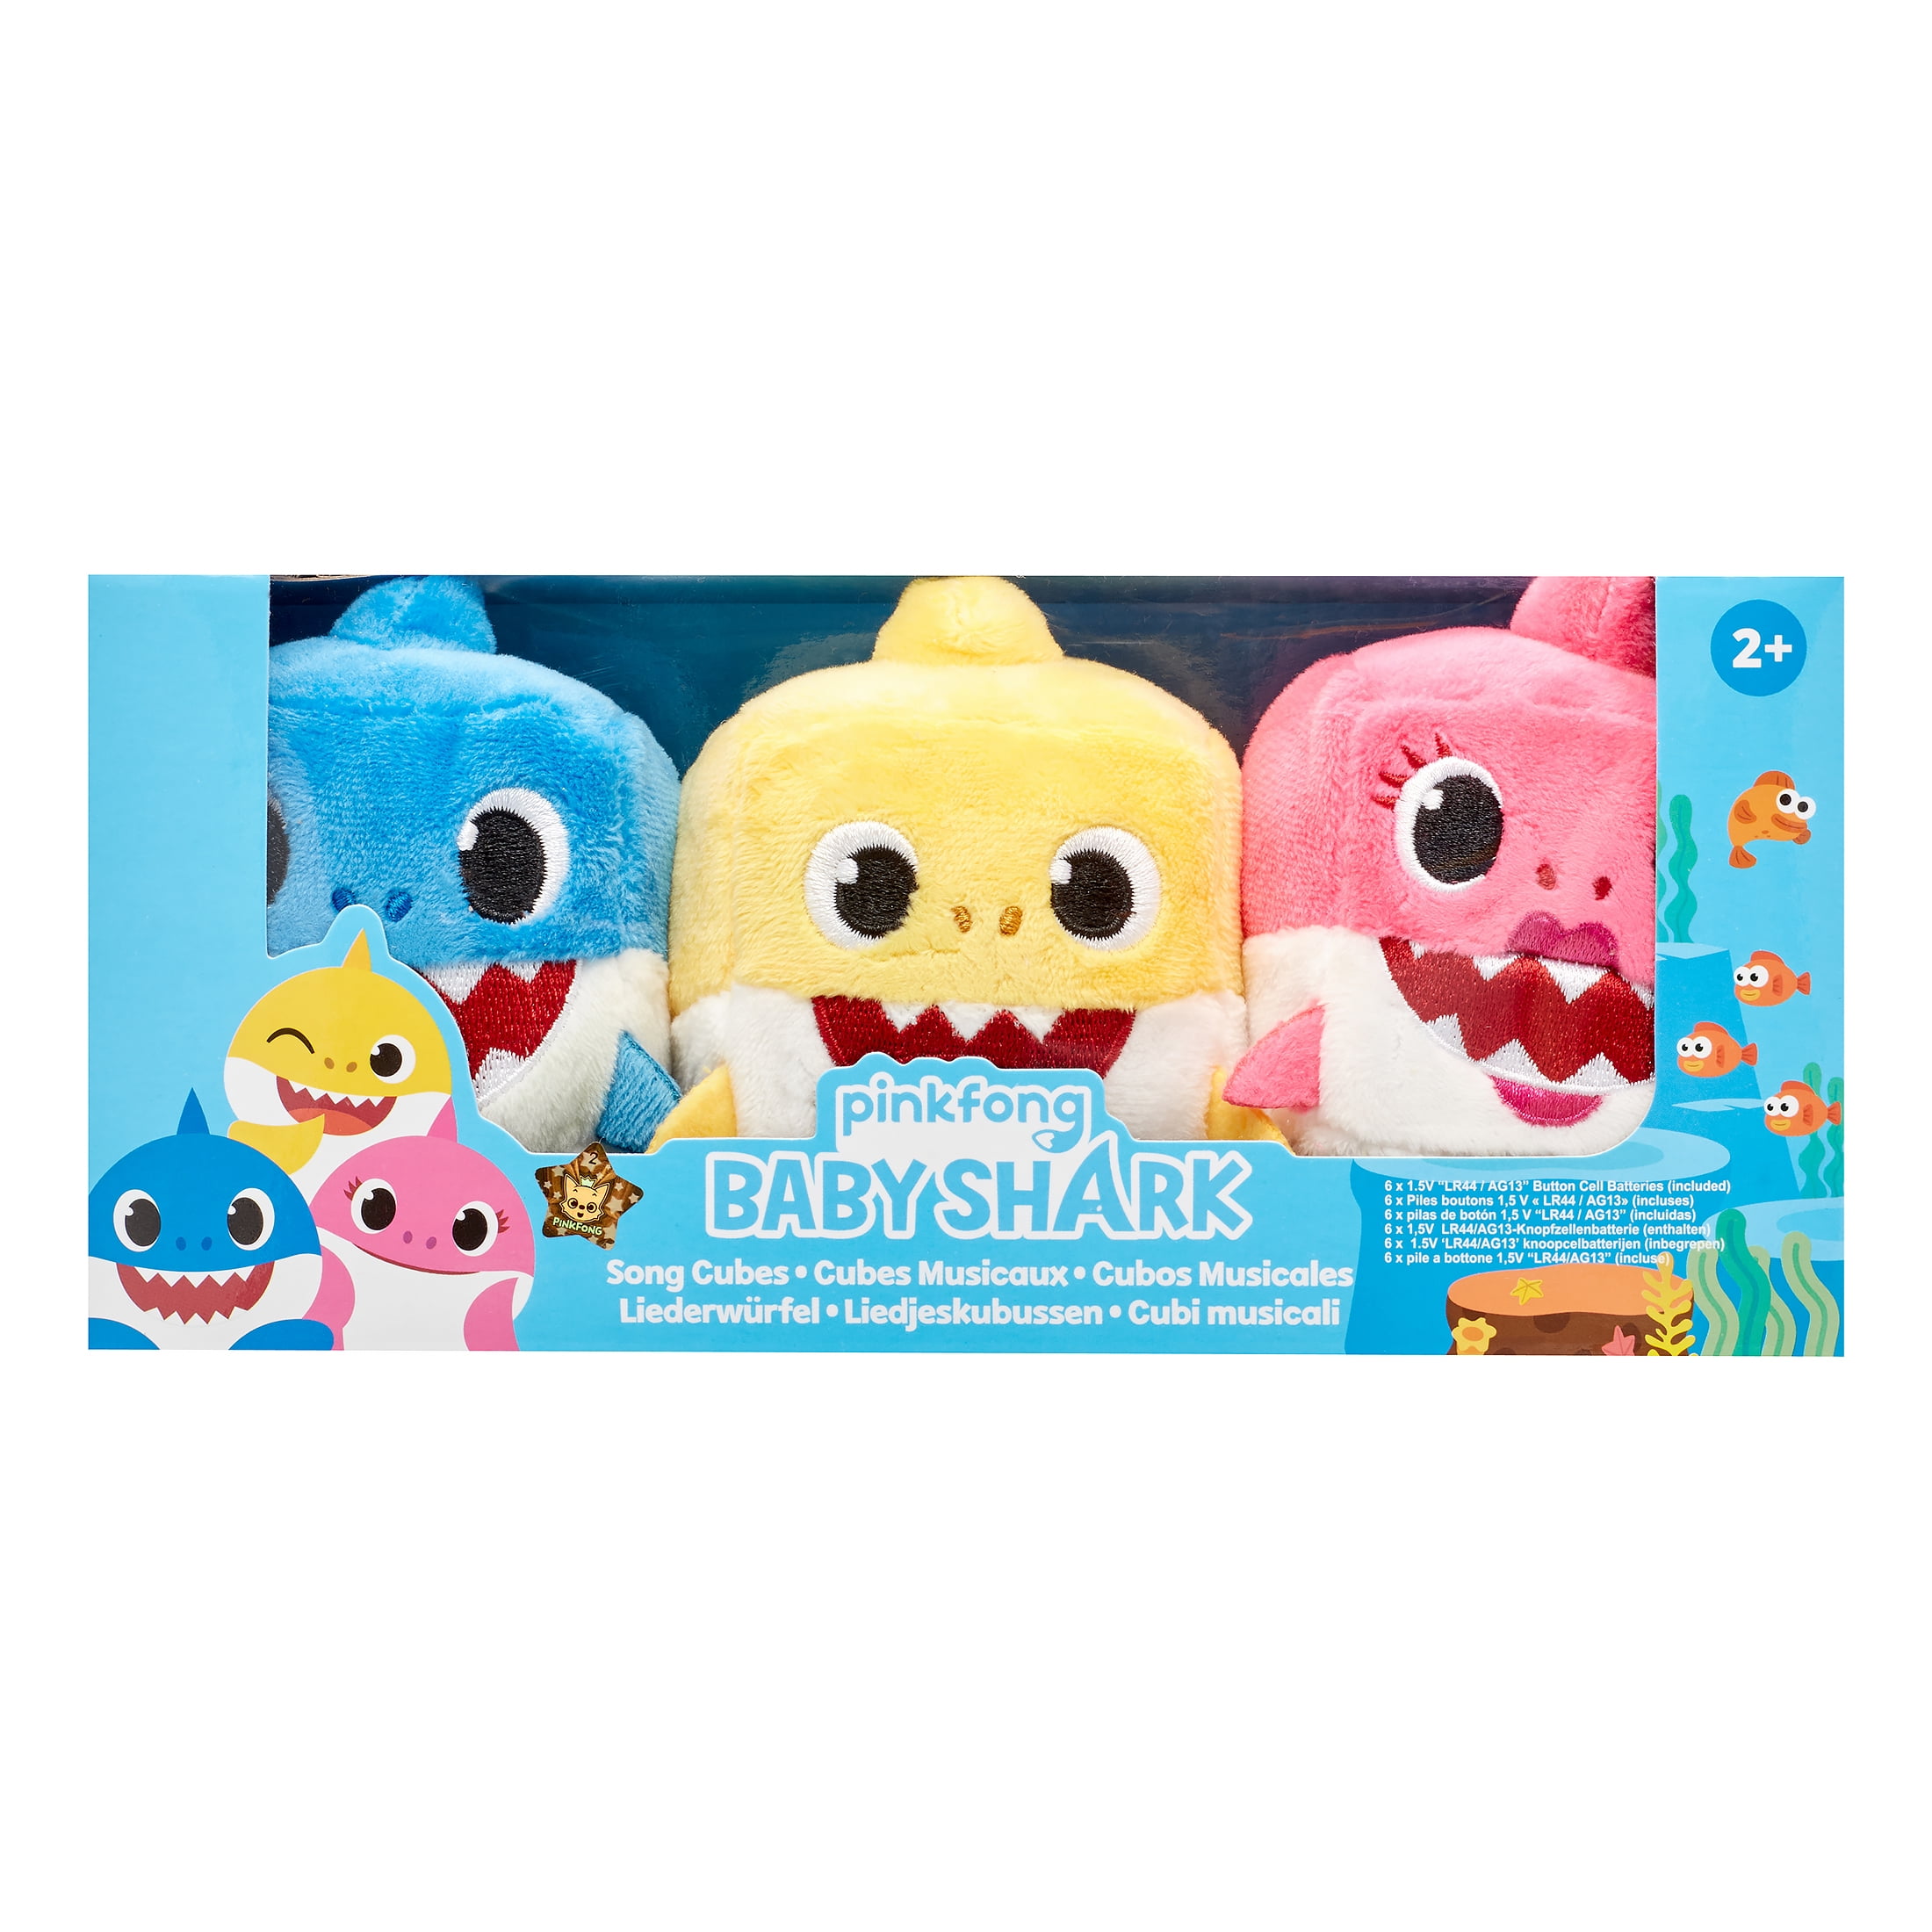 Pinkfong Baby Shark Official Song Cube - Shark Family 3-pack - by WowWee